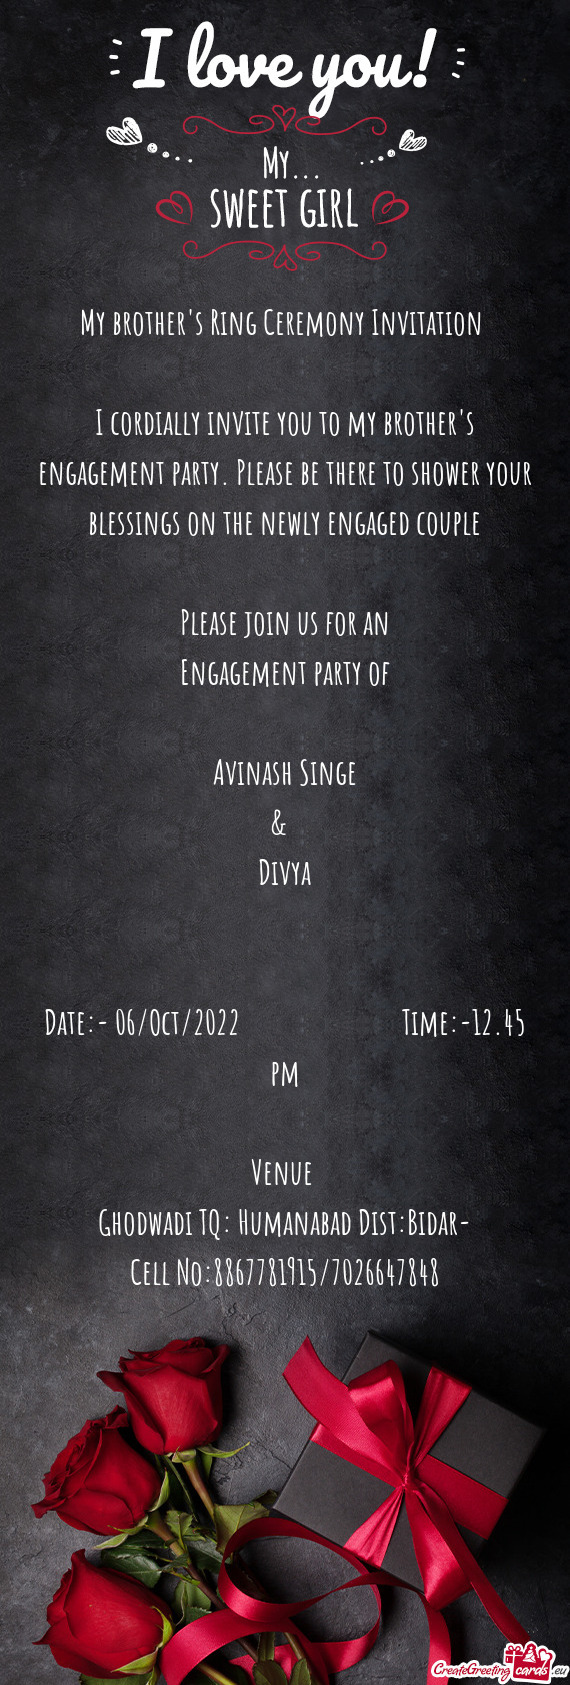 Date:- 06/Oct/2022       Time:-12.45 pm